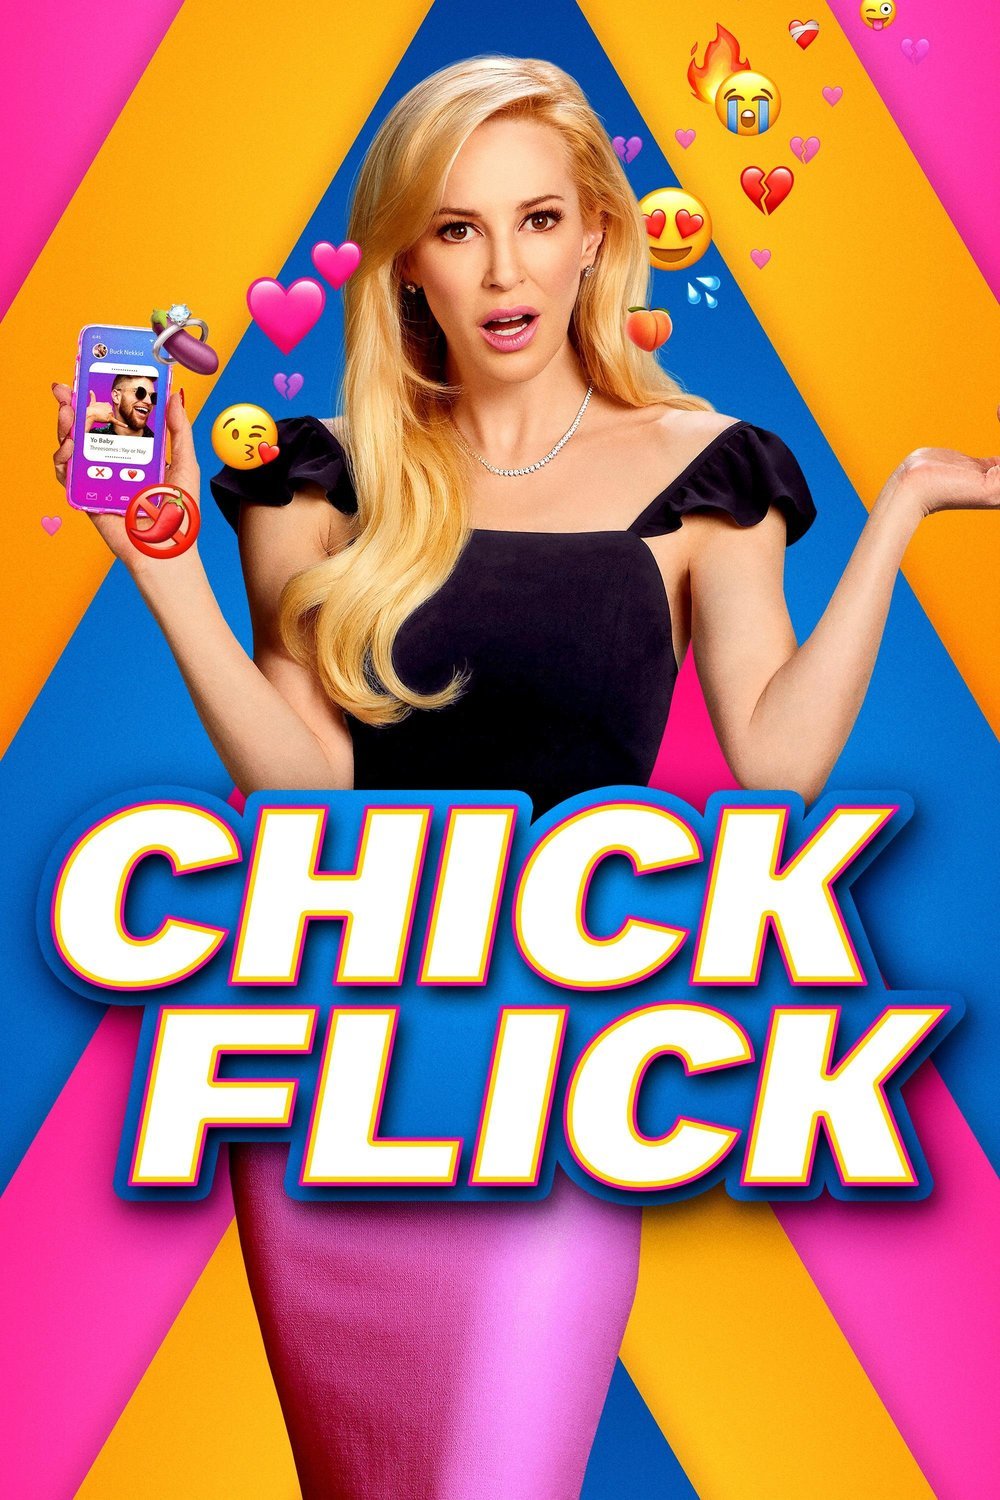 Poster of the movie Chick Flick